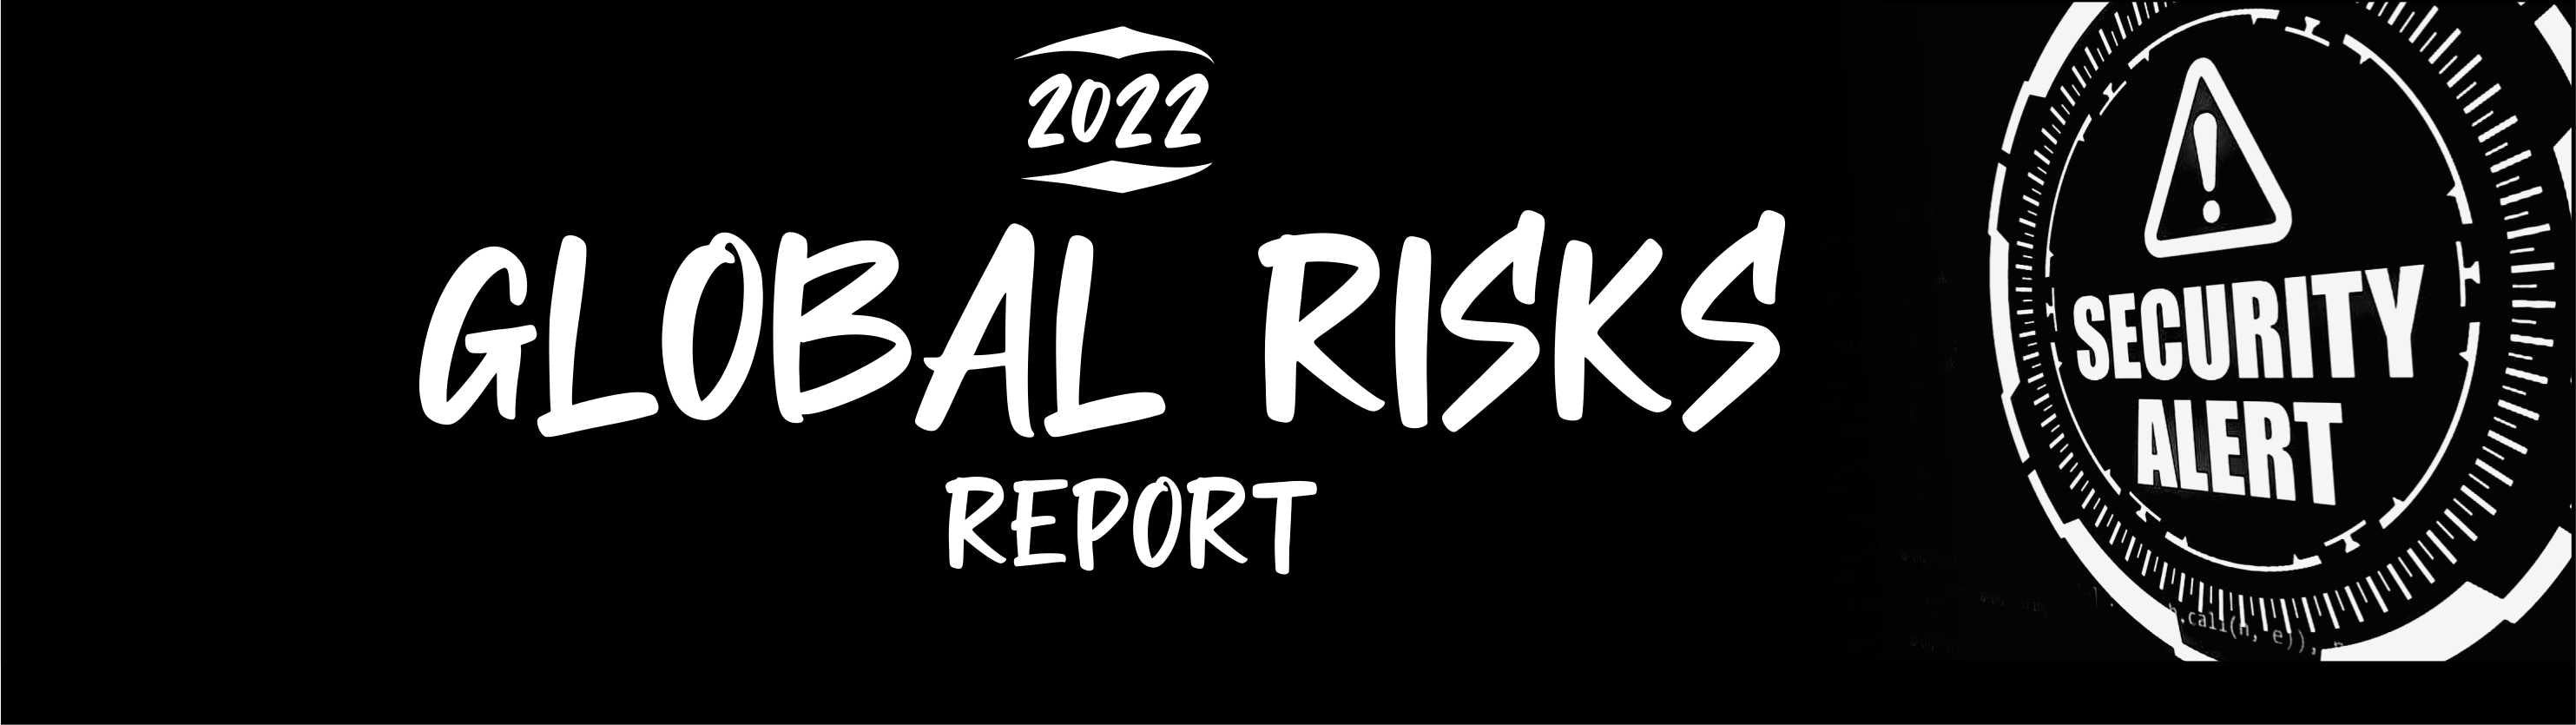 The Global Risks Report: Uncovering the Startling Threats That Matter Most 2022